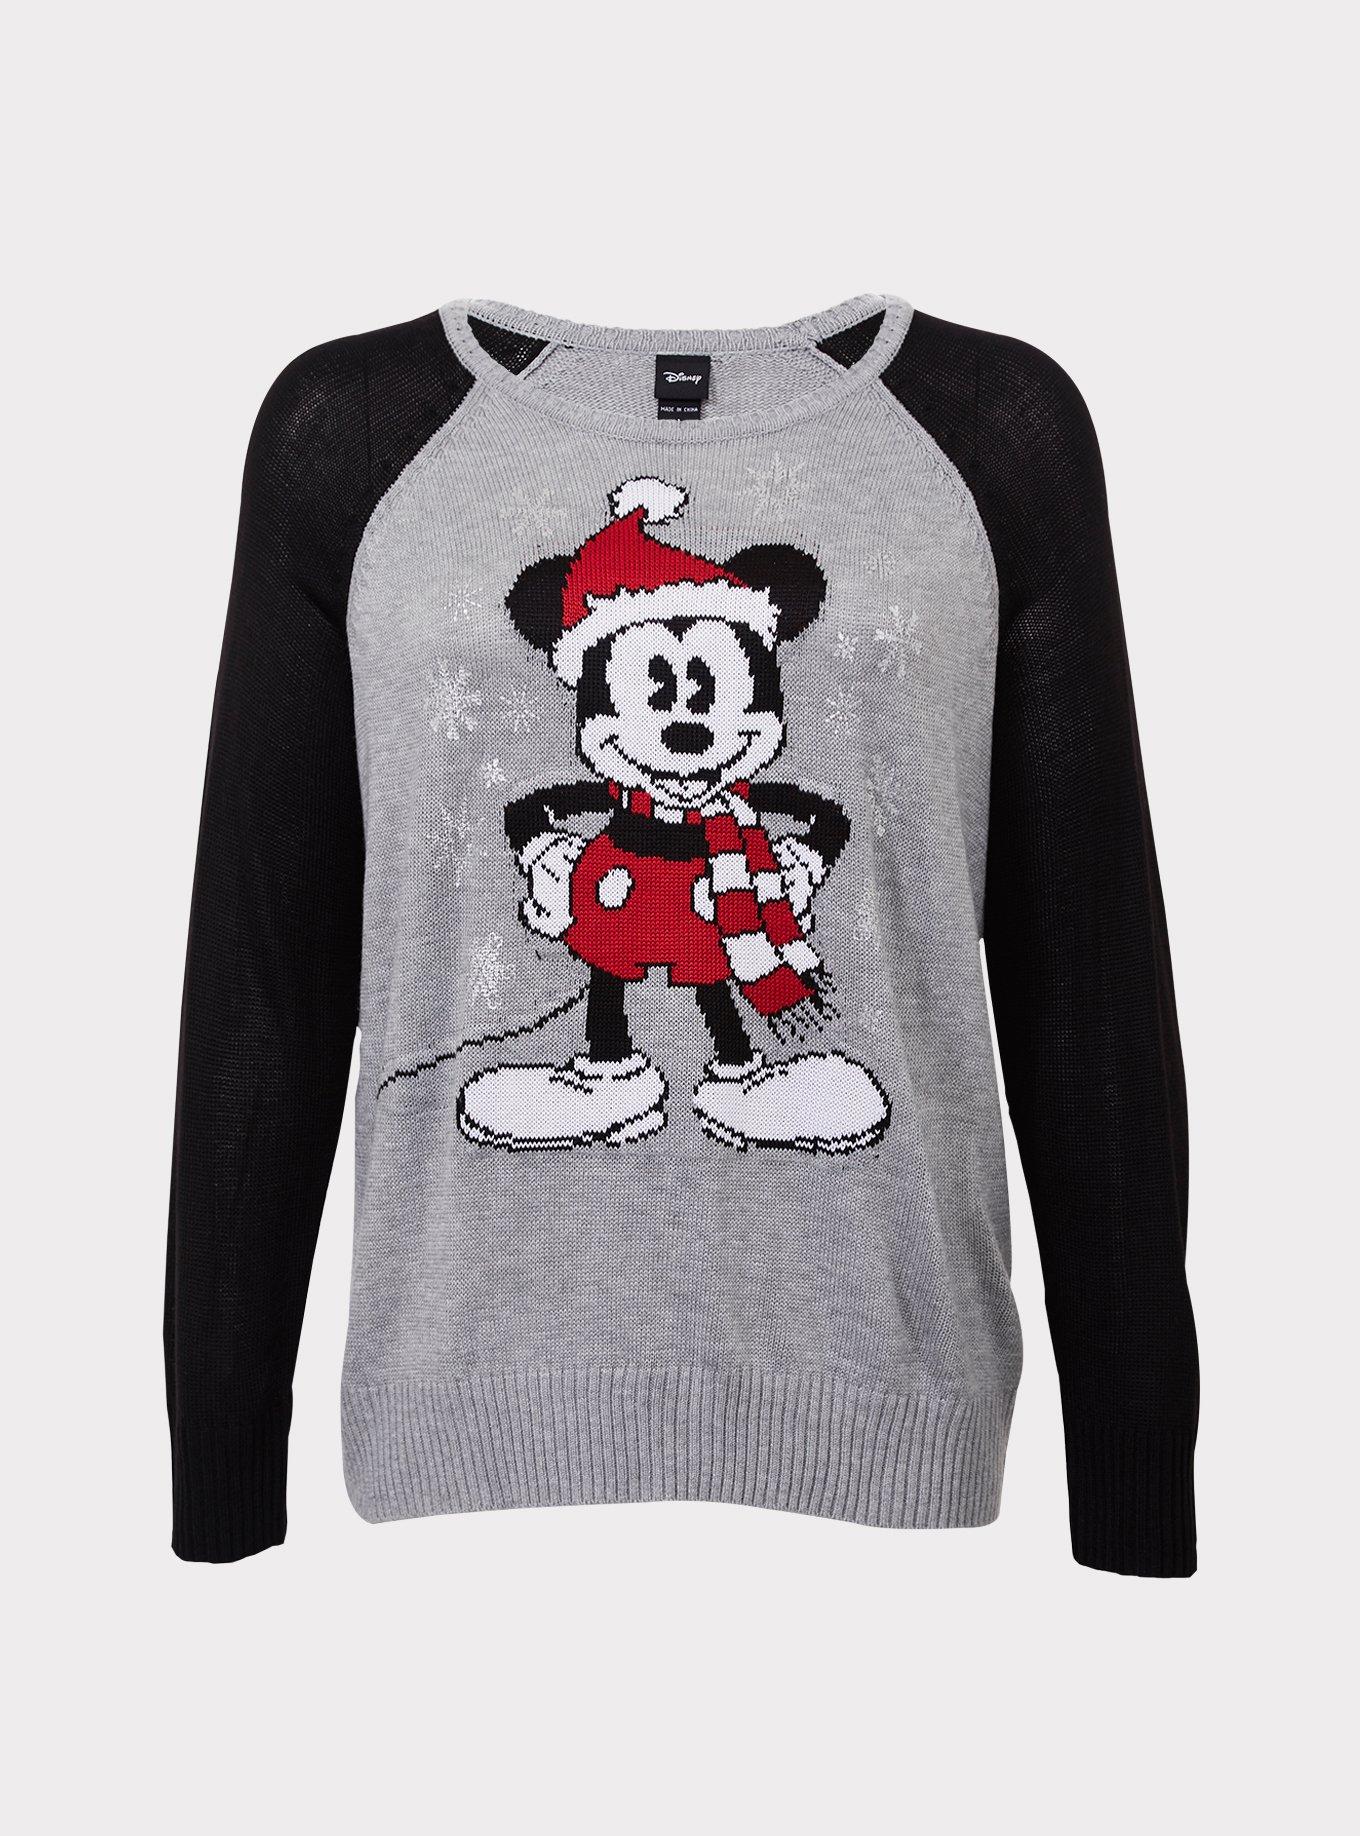 Plus Size - Disney Holiday Mickey Mouse Sweater - Torrid